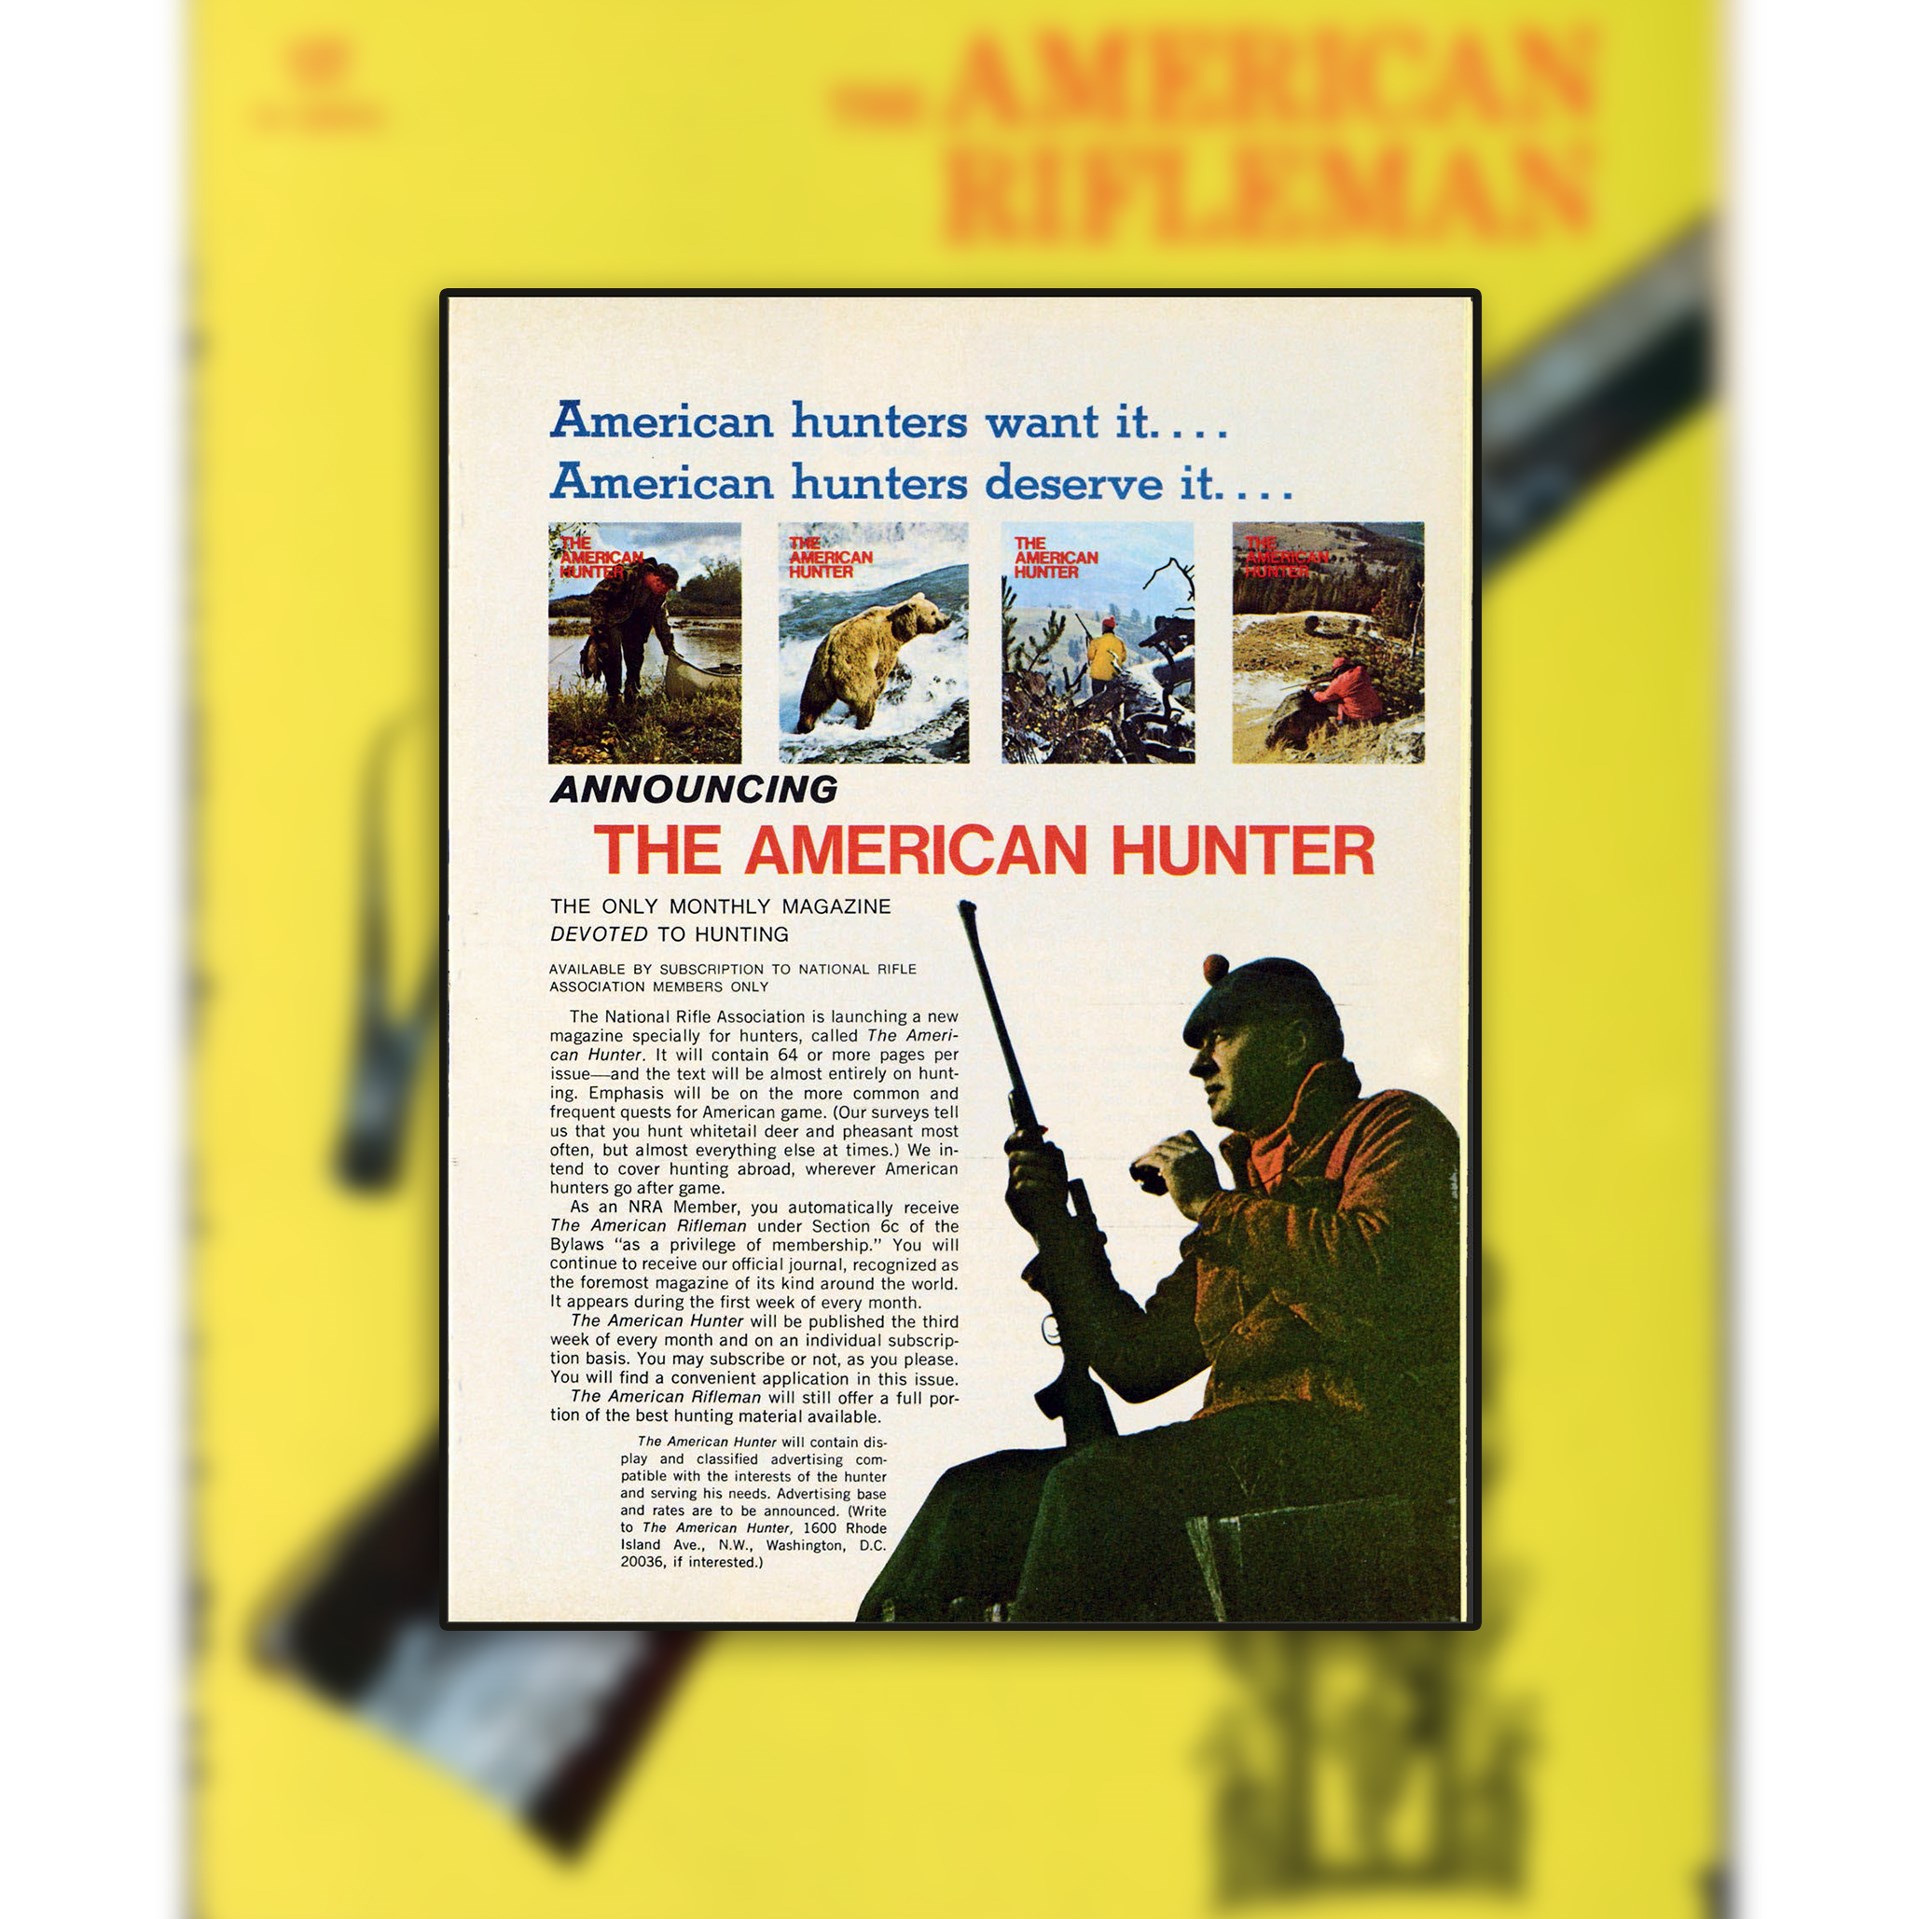 magazine excerpt overlay cover yellow hunting guns hunter outdoors adventures stories announcement new magazine the american hunter